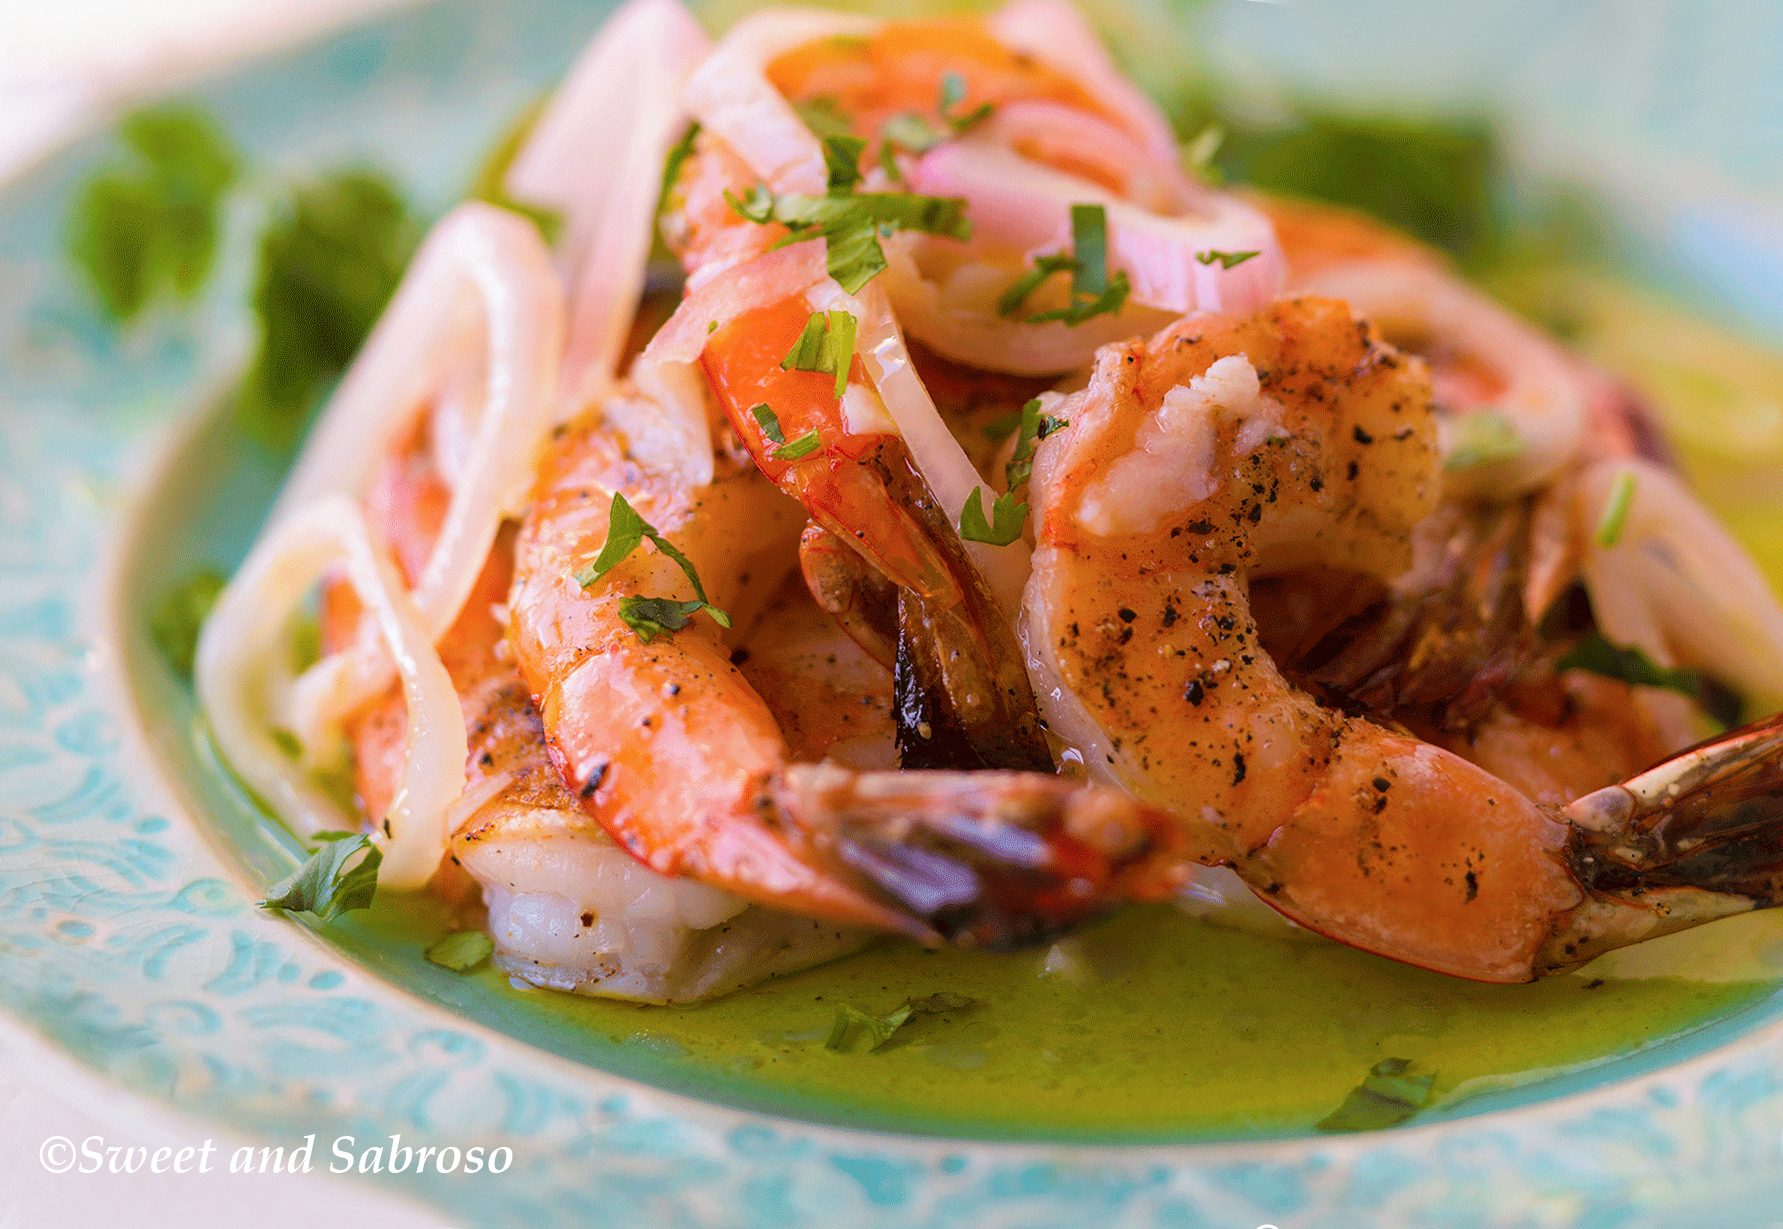 Grilled Shrimp with Cuban Mojo Criollo Sauce